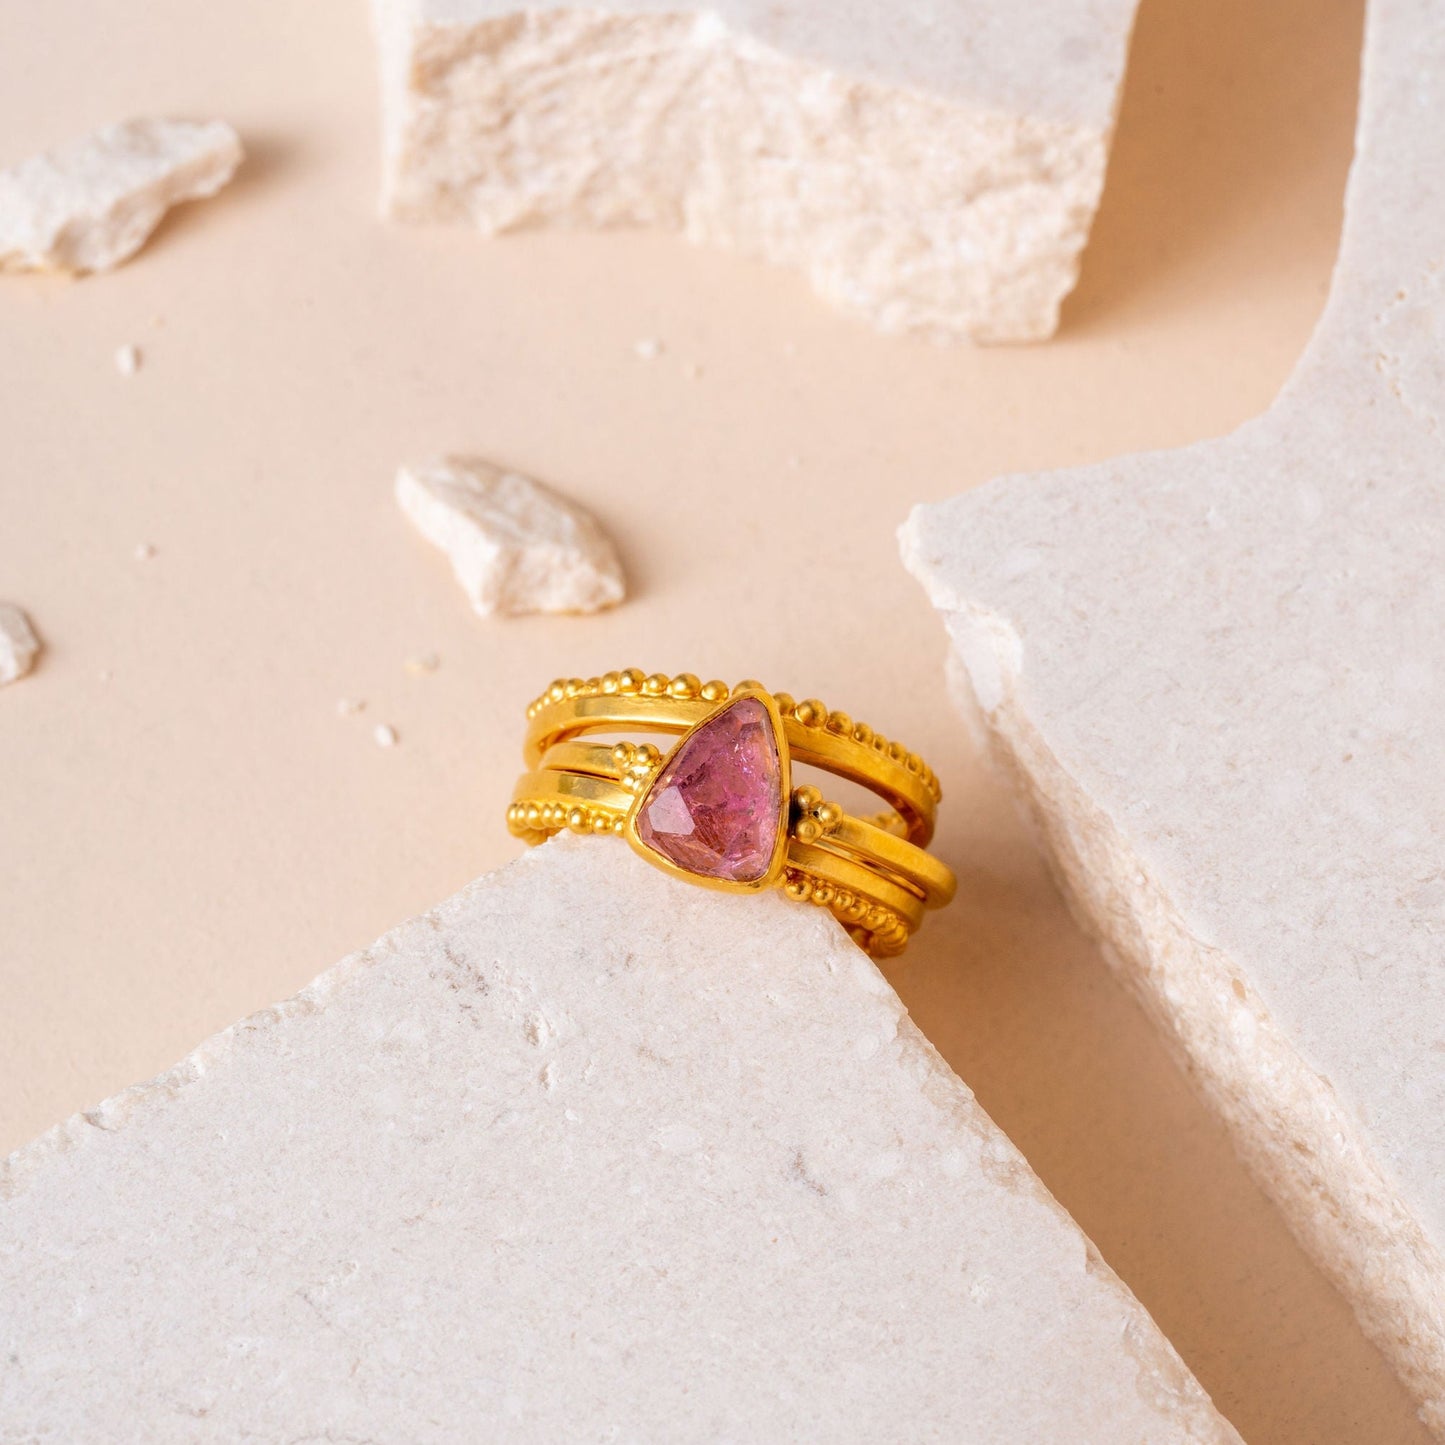 A cluster of handcrafted gold rings with intricate granulation details, one adorned with a charming pink tourmaline gem.